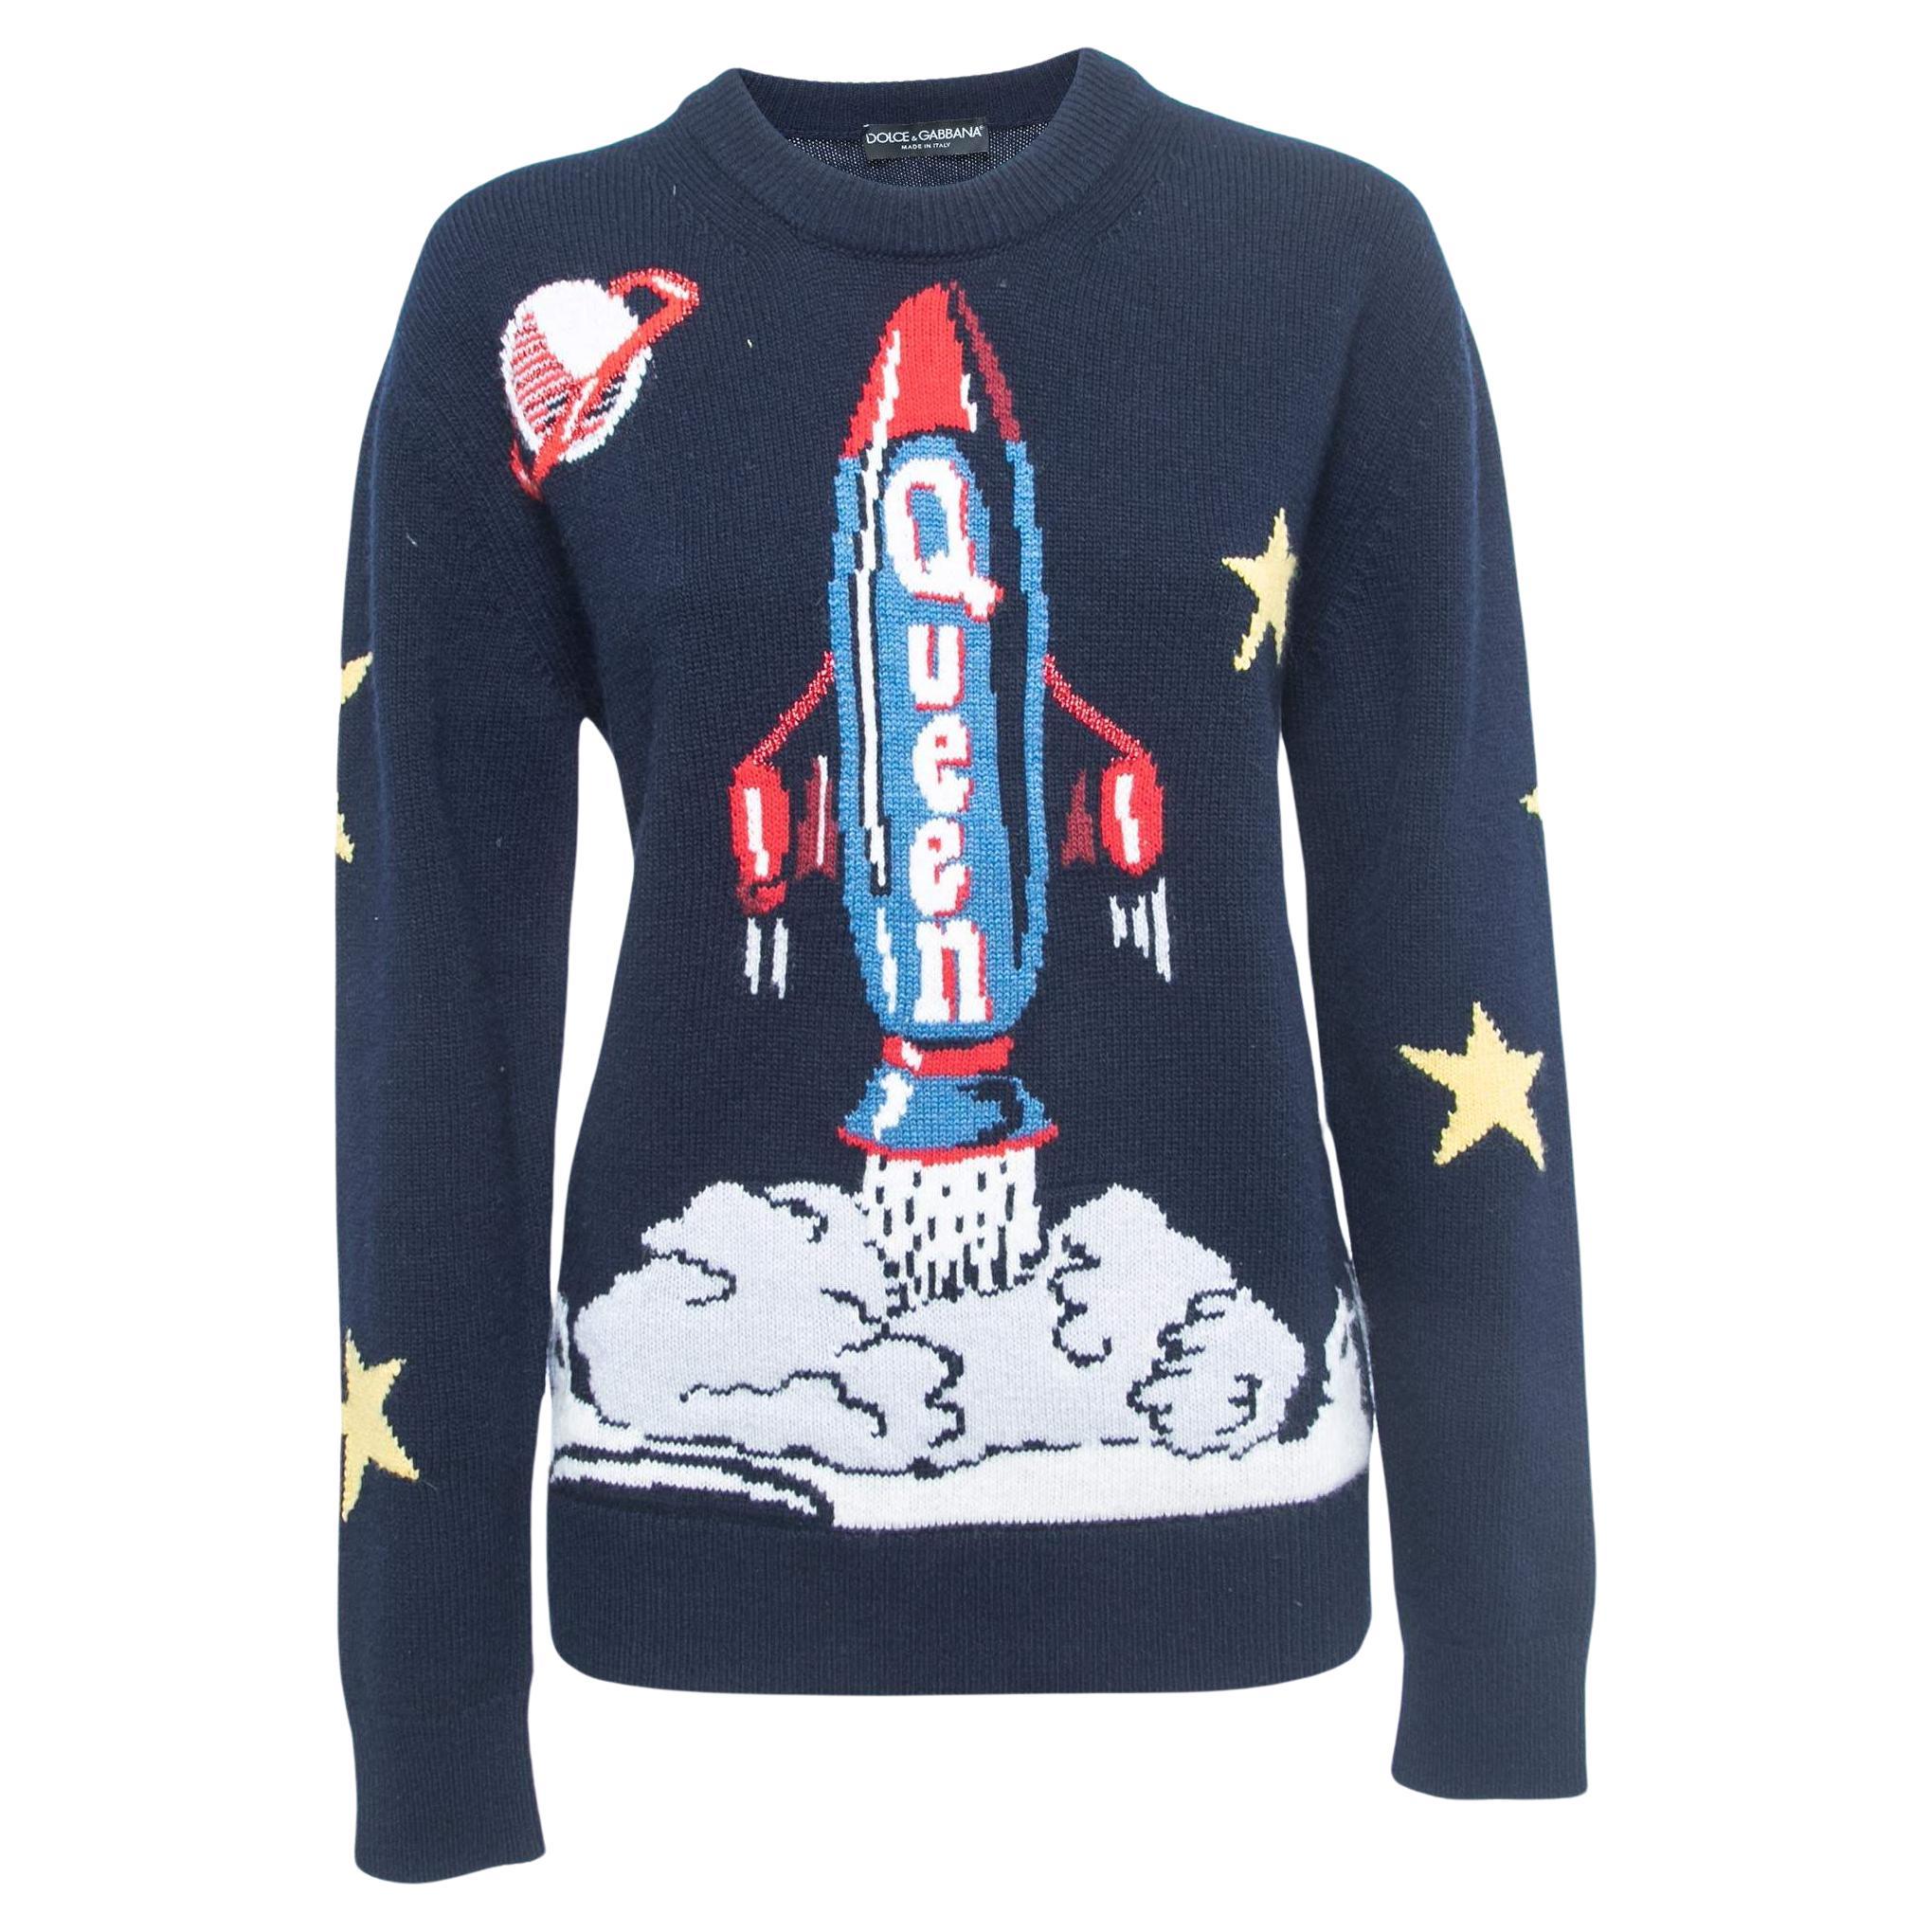 Louis Vuitton Woven Astronaut Sweater - Grey Sweaters, Clothing